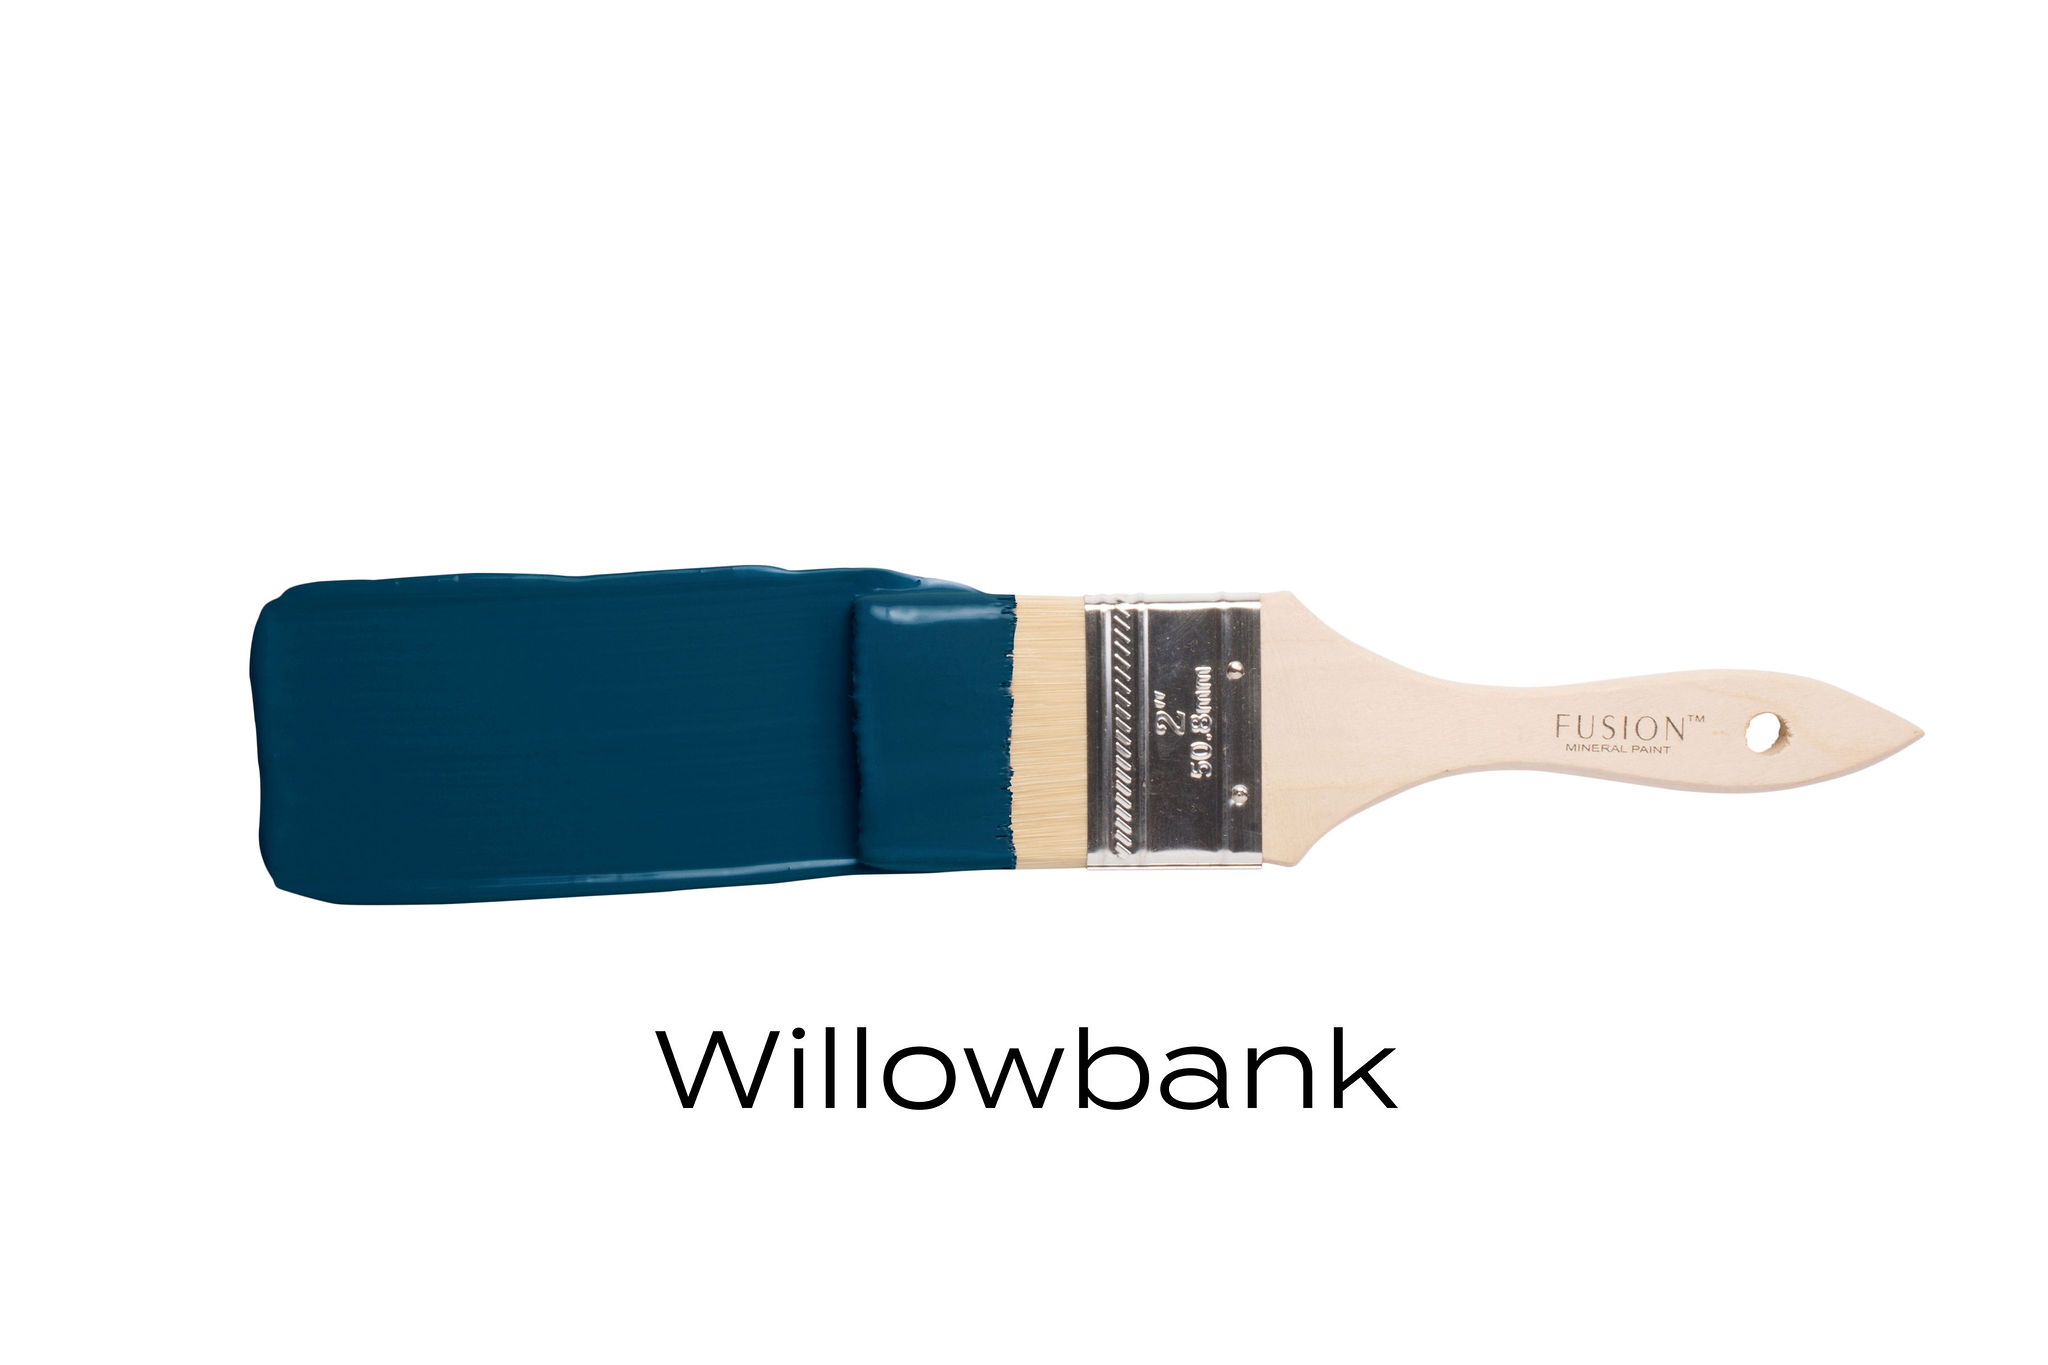 Willowbank Fusion Mineral Paint Goed Gestyled